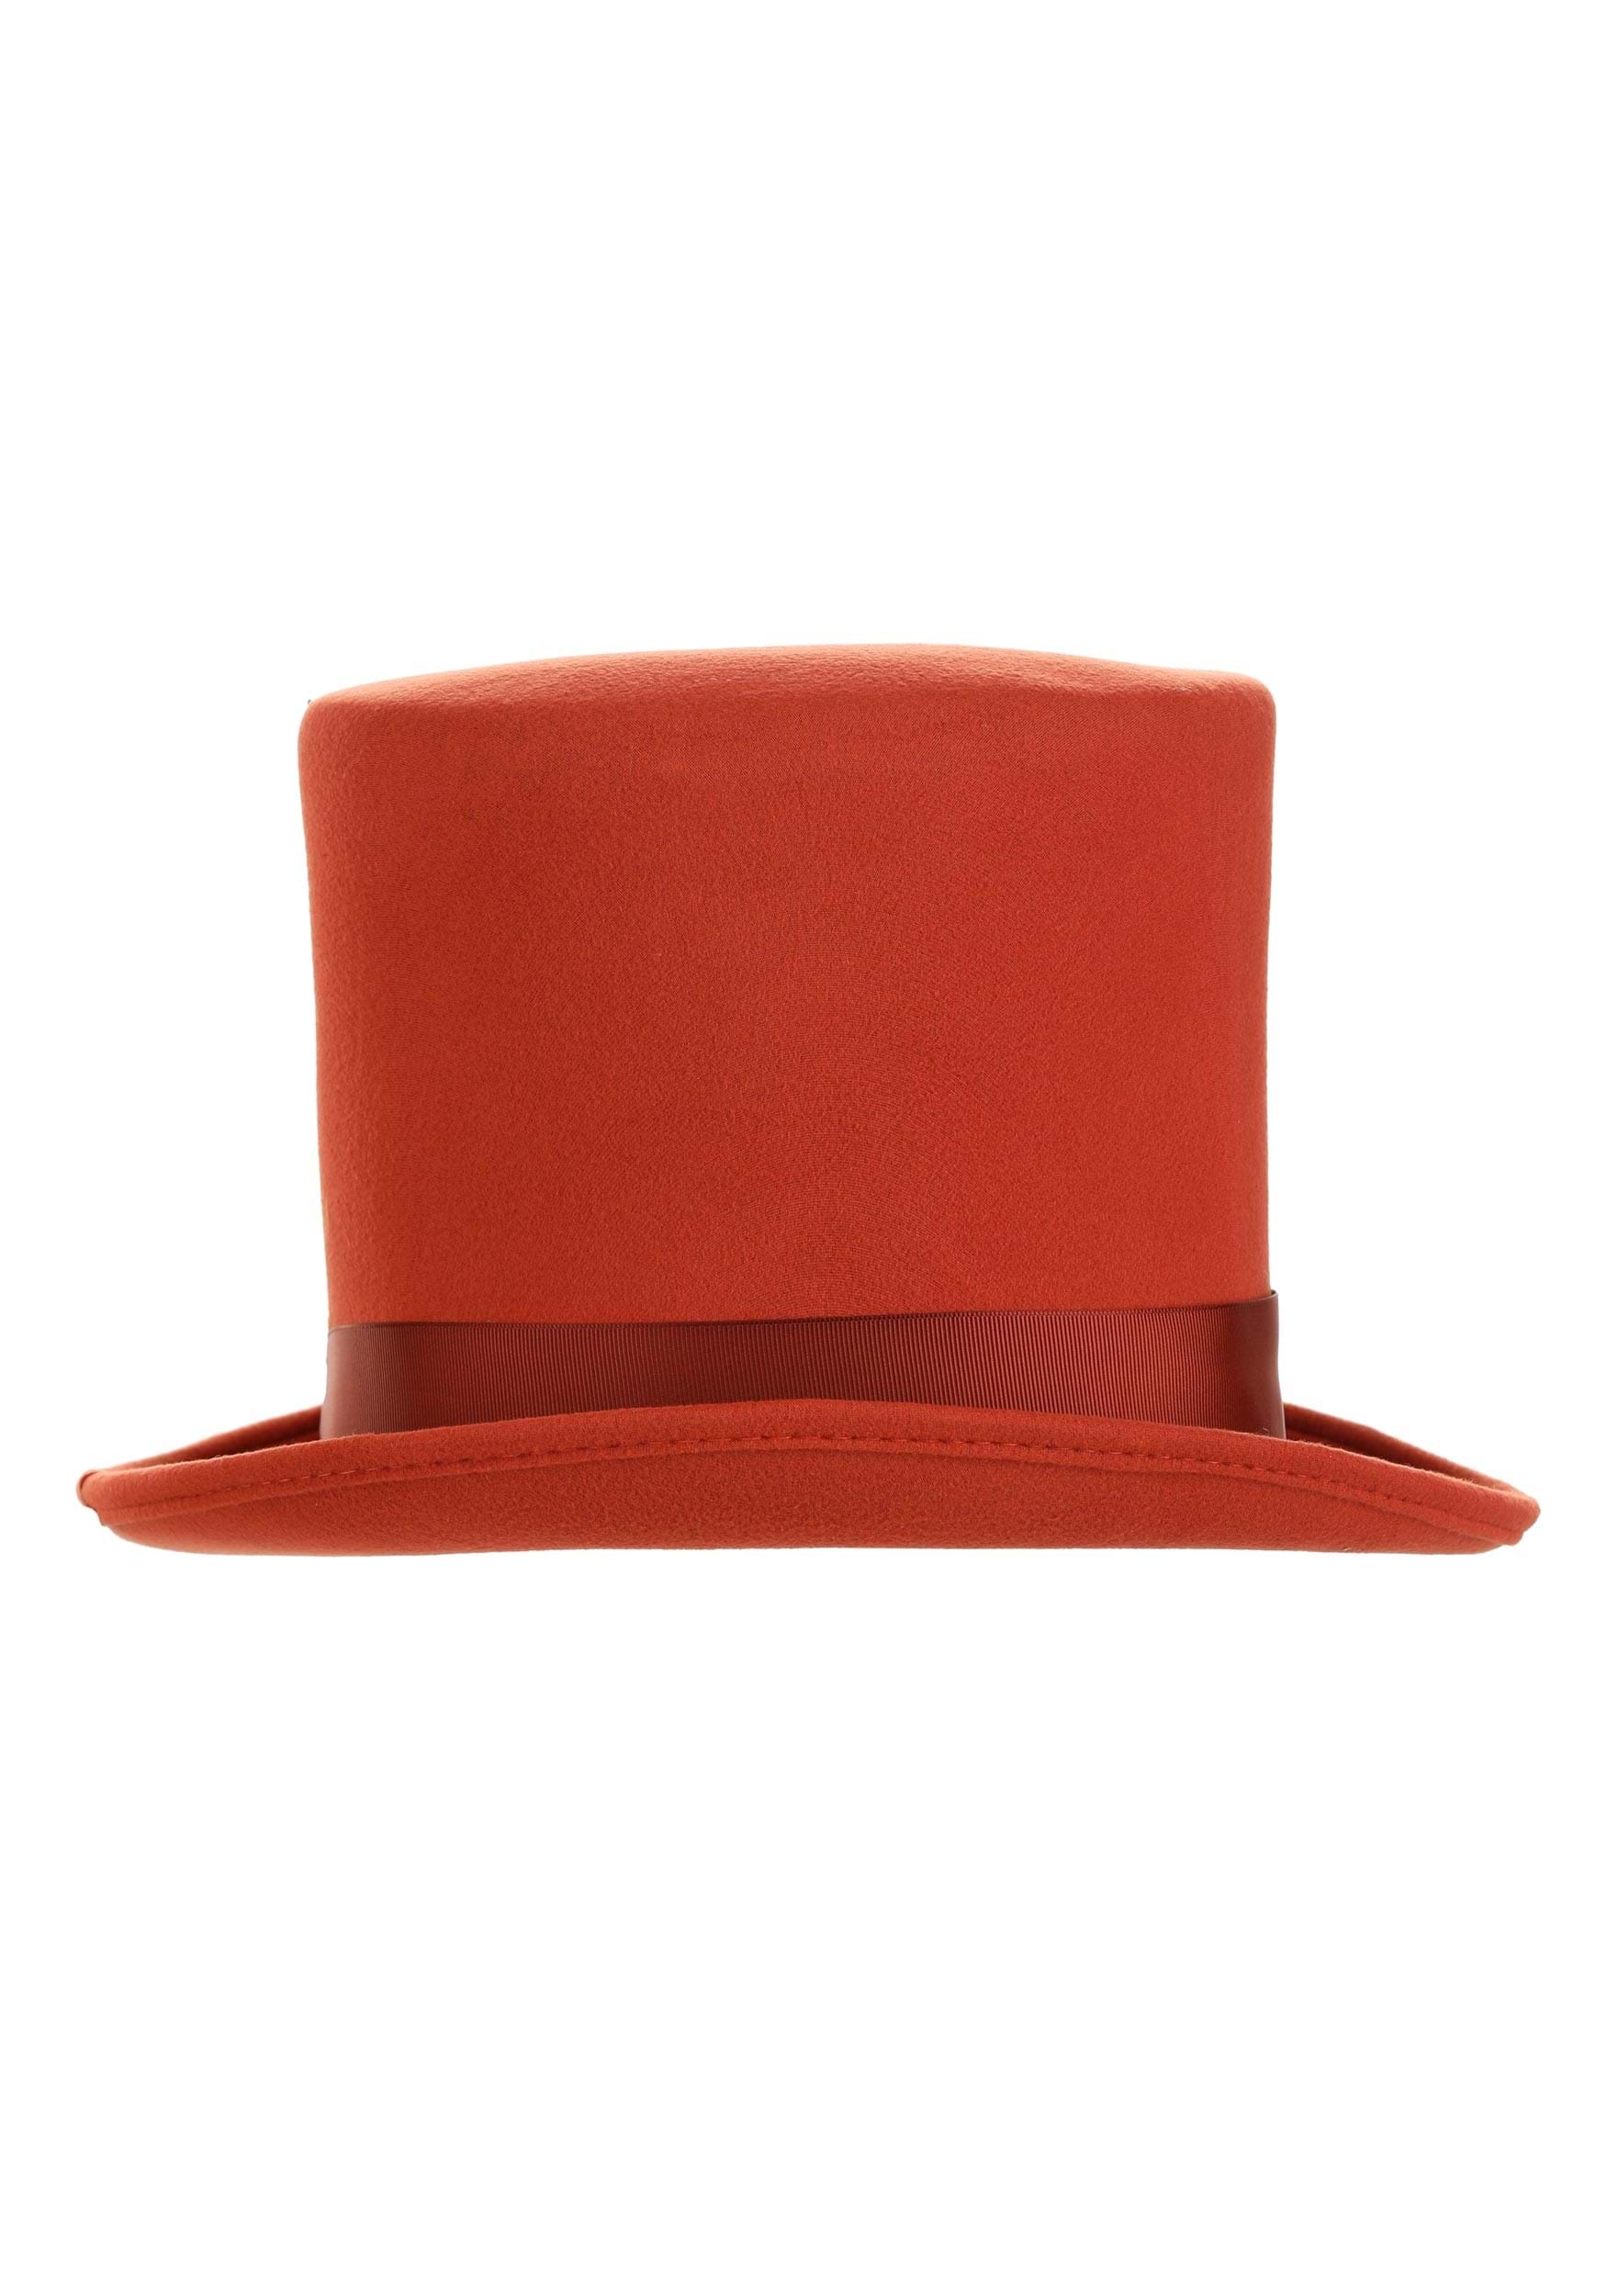 Authentic Willy Wonka Hat For Men , Costume Hat Accessories